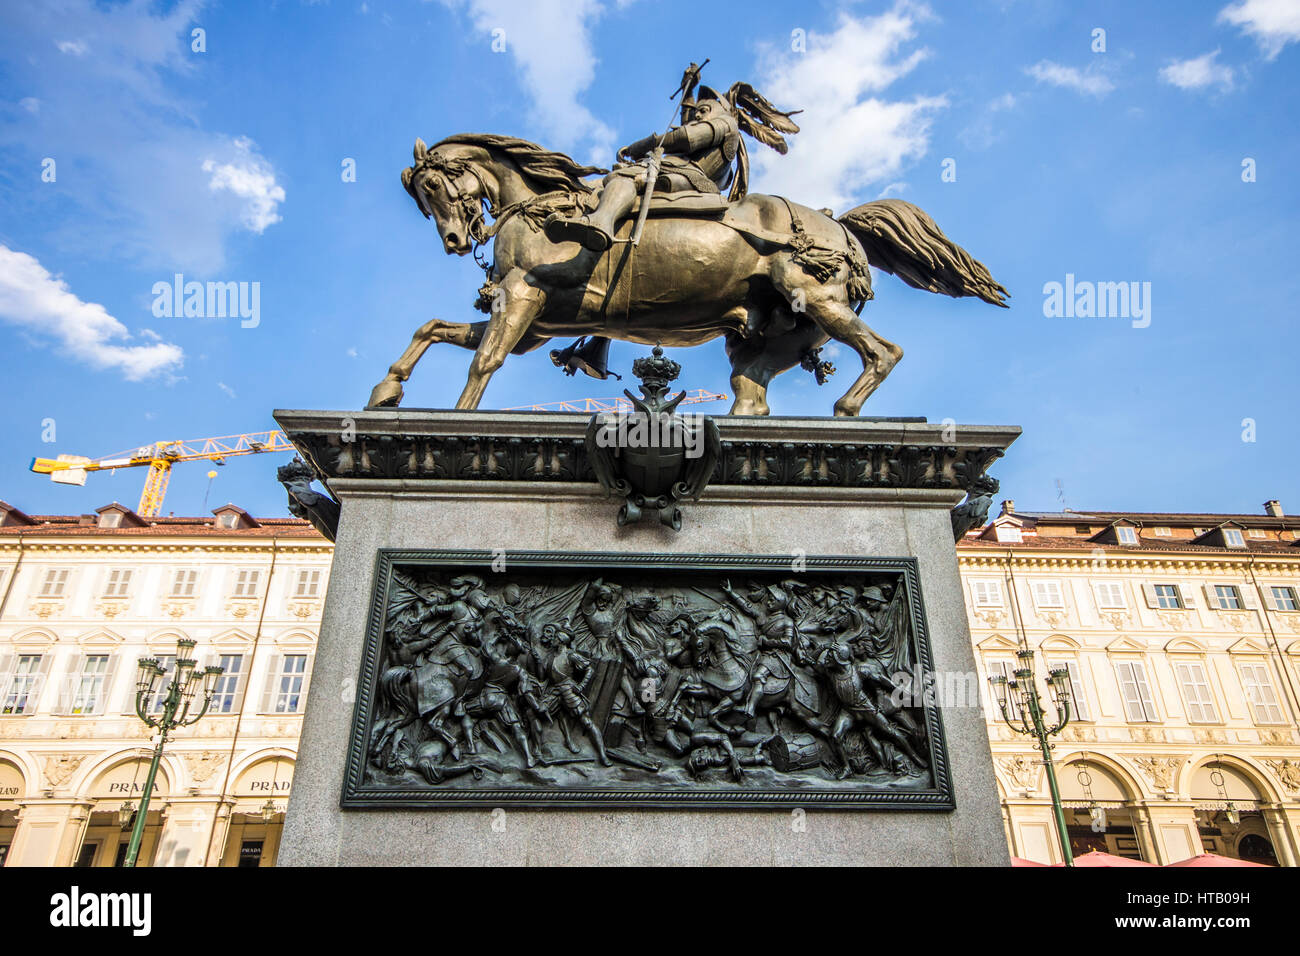 Monuments of Piazza San Carlo, one of the main city squares in Turin, Italy. Equestrian statue of Emmanuel Philibert, Duke of Savoy, by Carlo Marochet Stock Photo